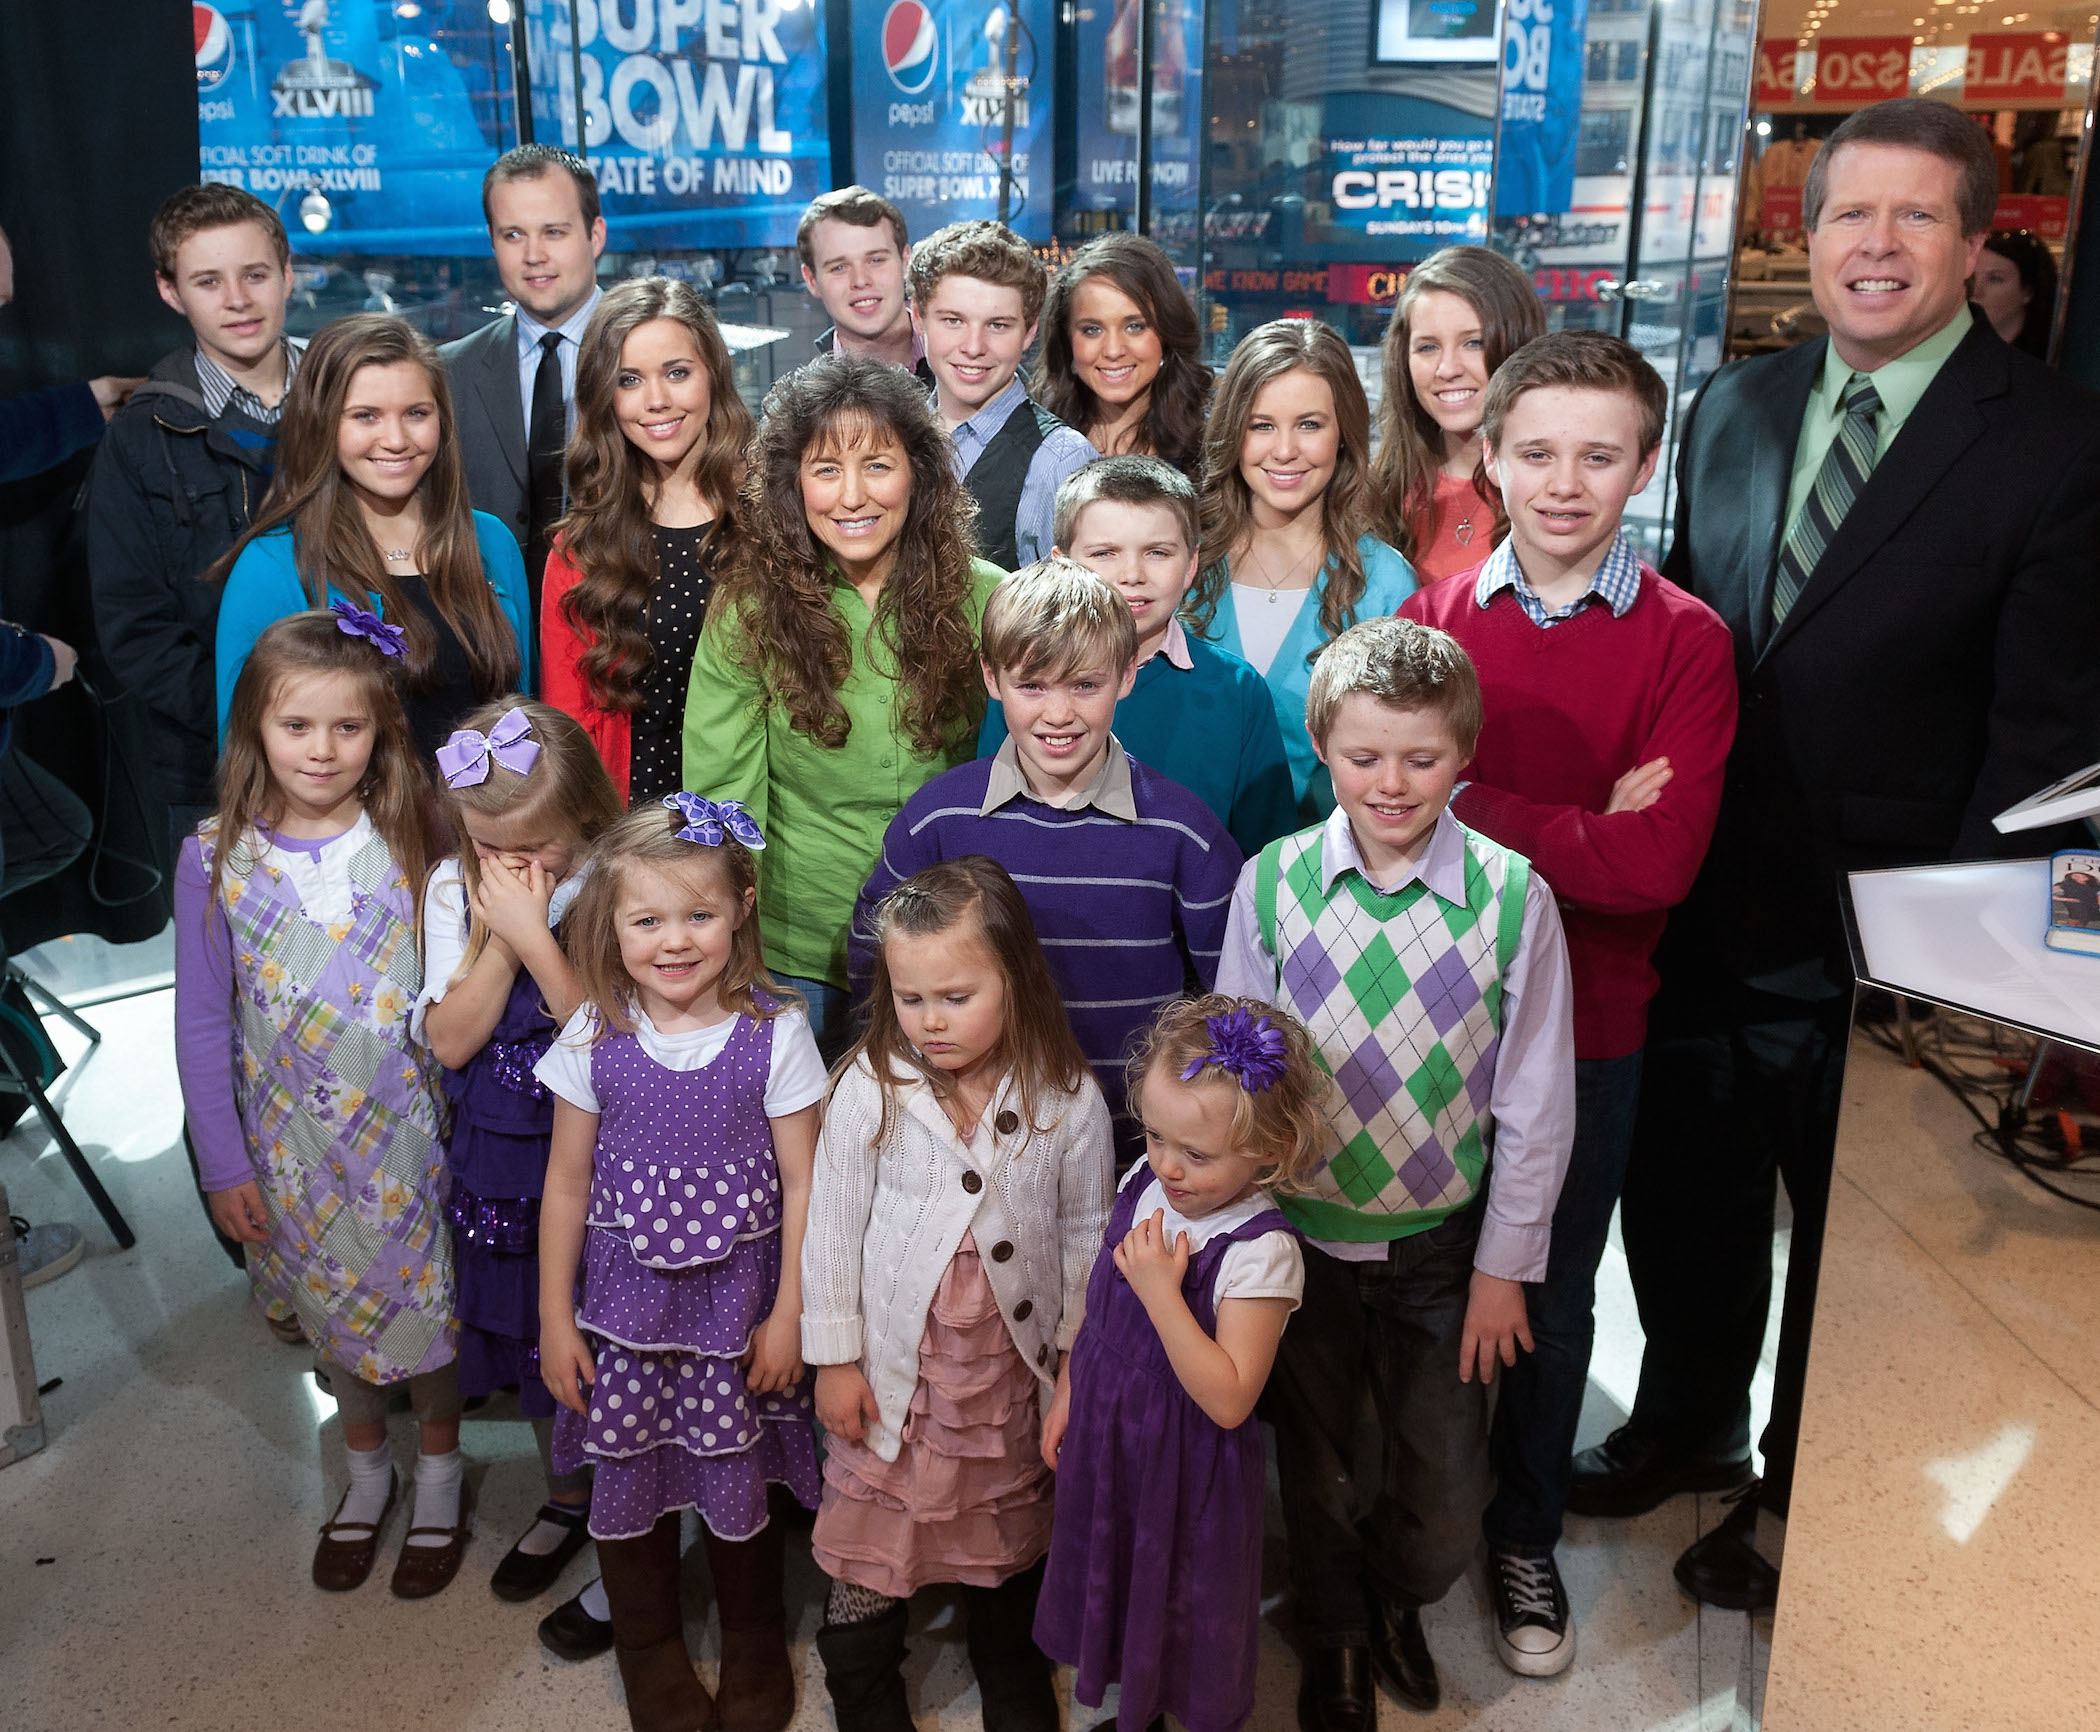 The Duggar family visits 'Extra'